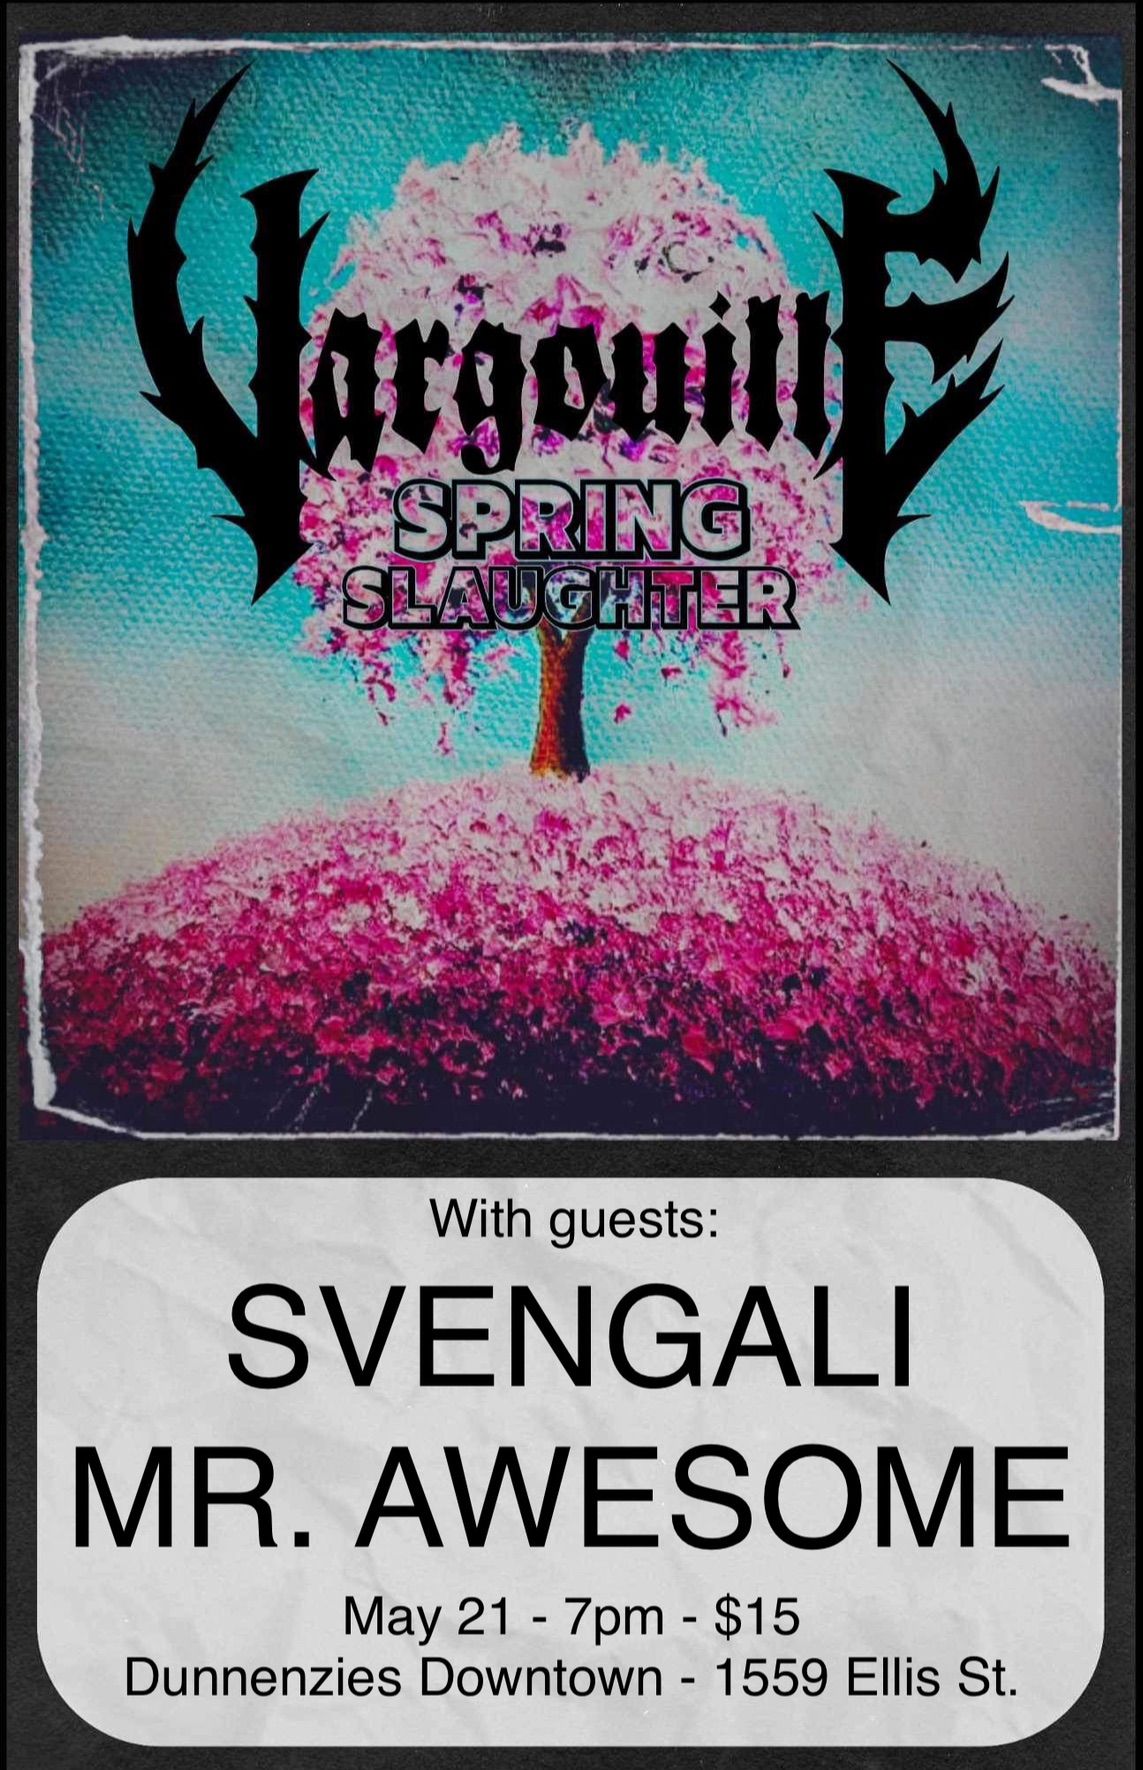 May 21 - Vargouille (Edmonton), Svengali, Mr. Awesome at Dunnenzies Downtown